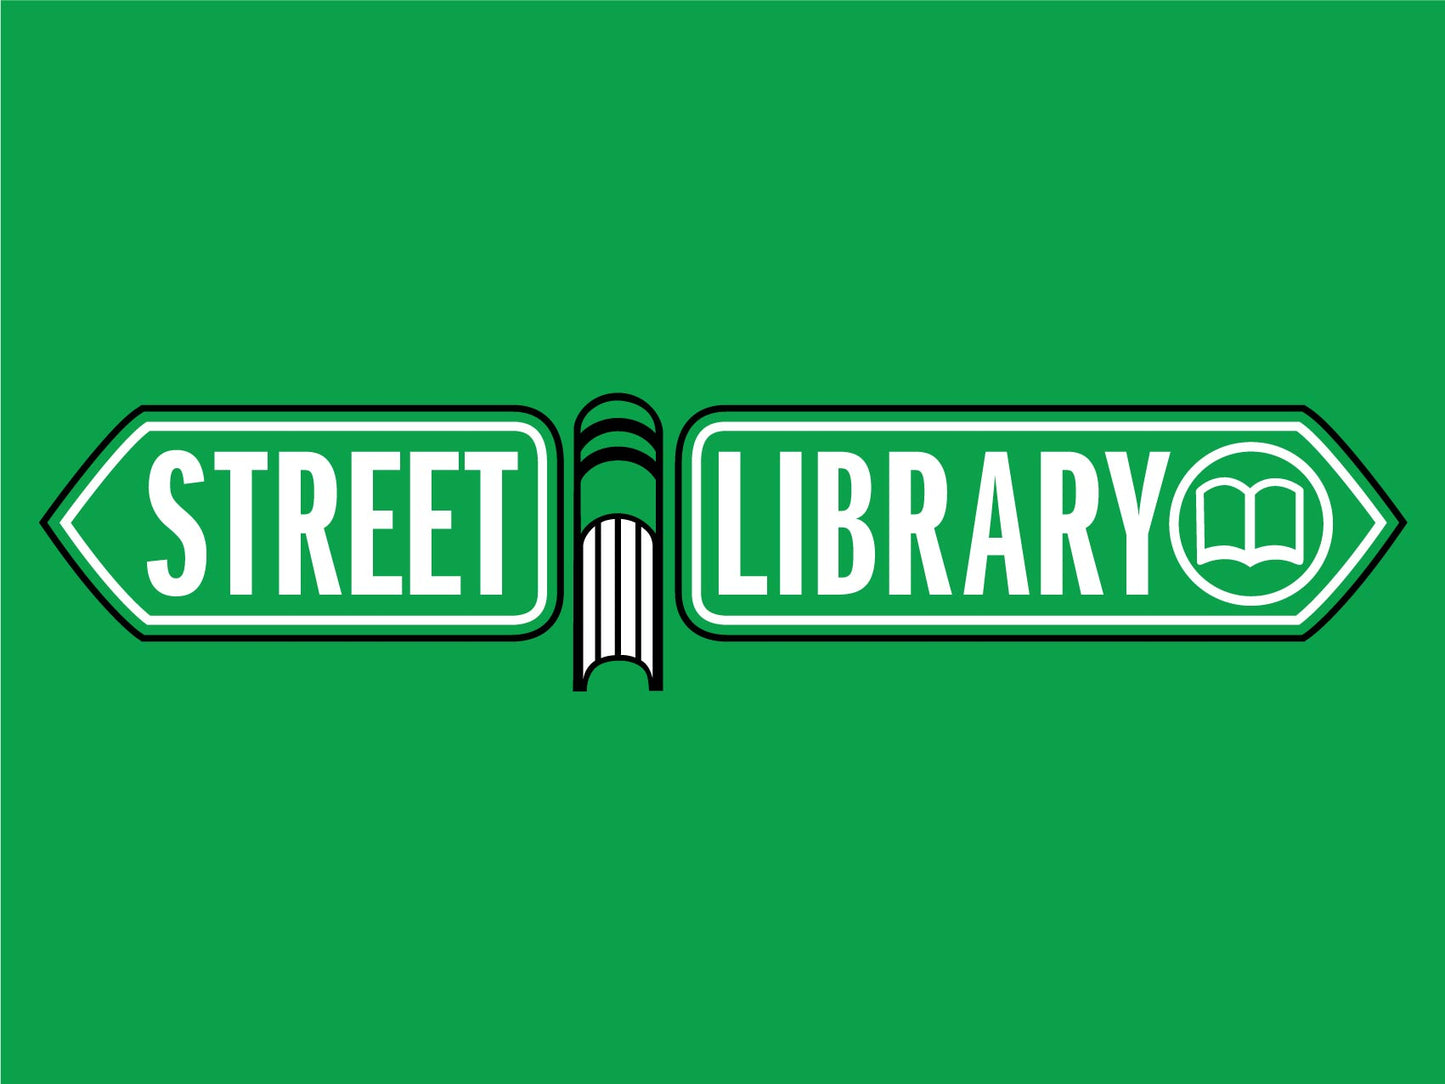 Street Library Sign